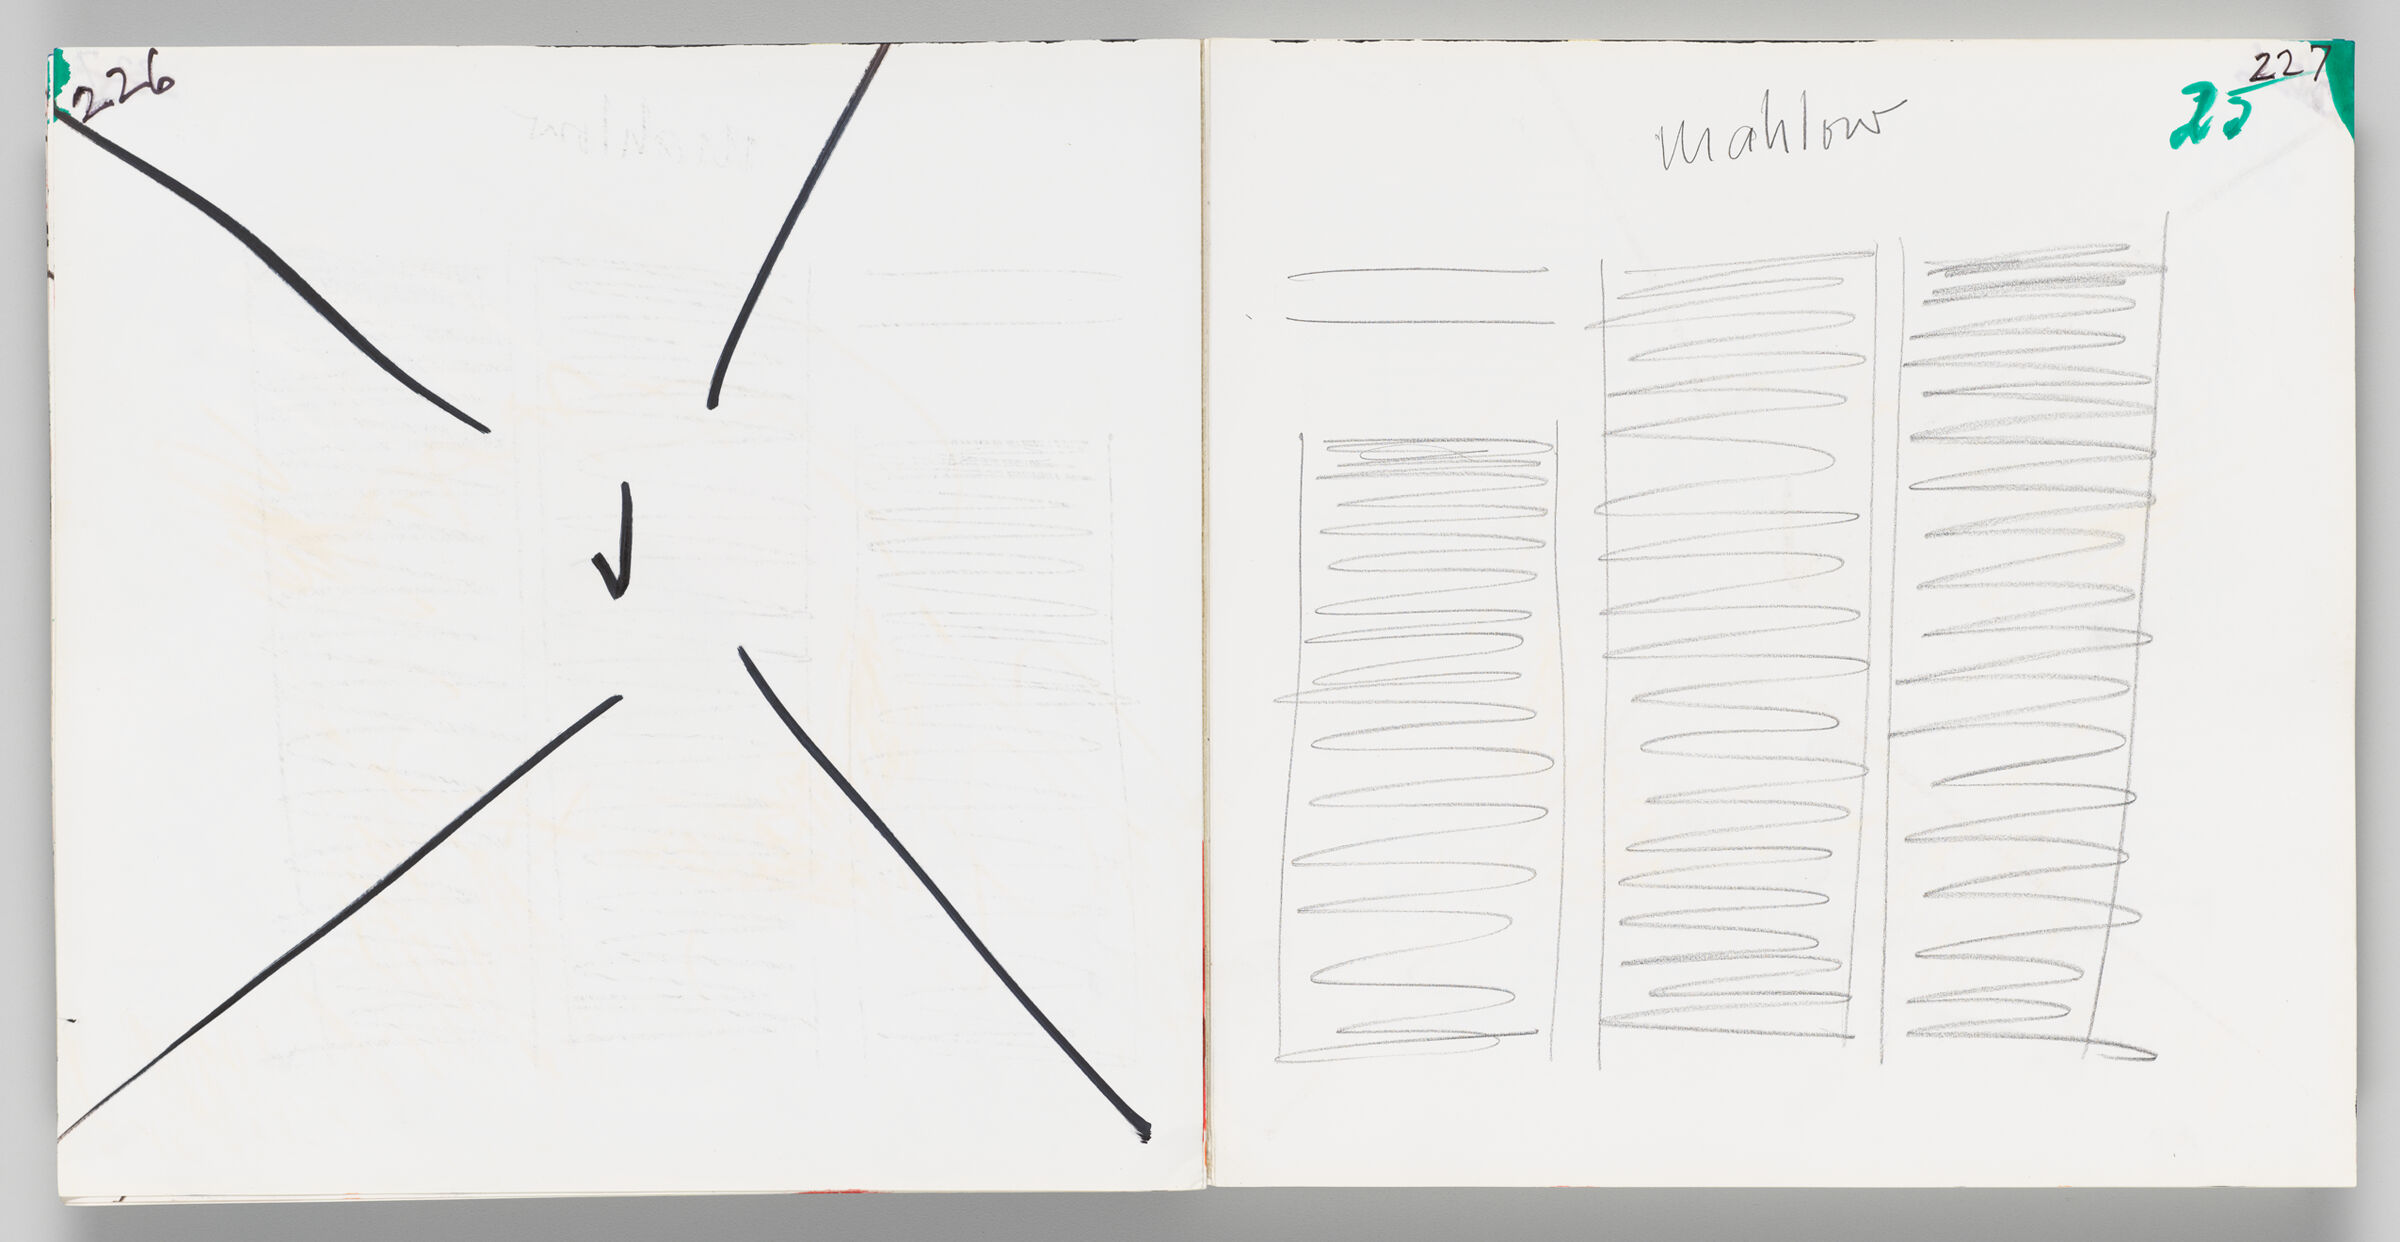 Untitled (Lines And Checkmark, Left Page); Untitled (Page Layout Design, Right Page)